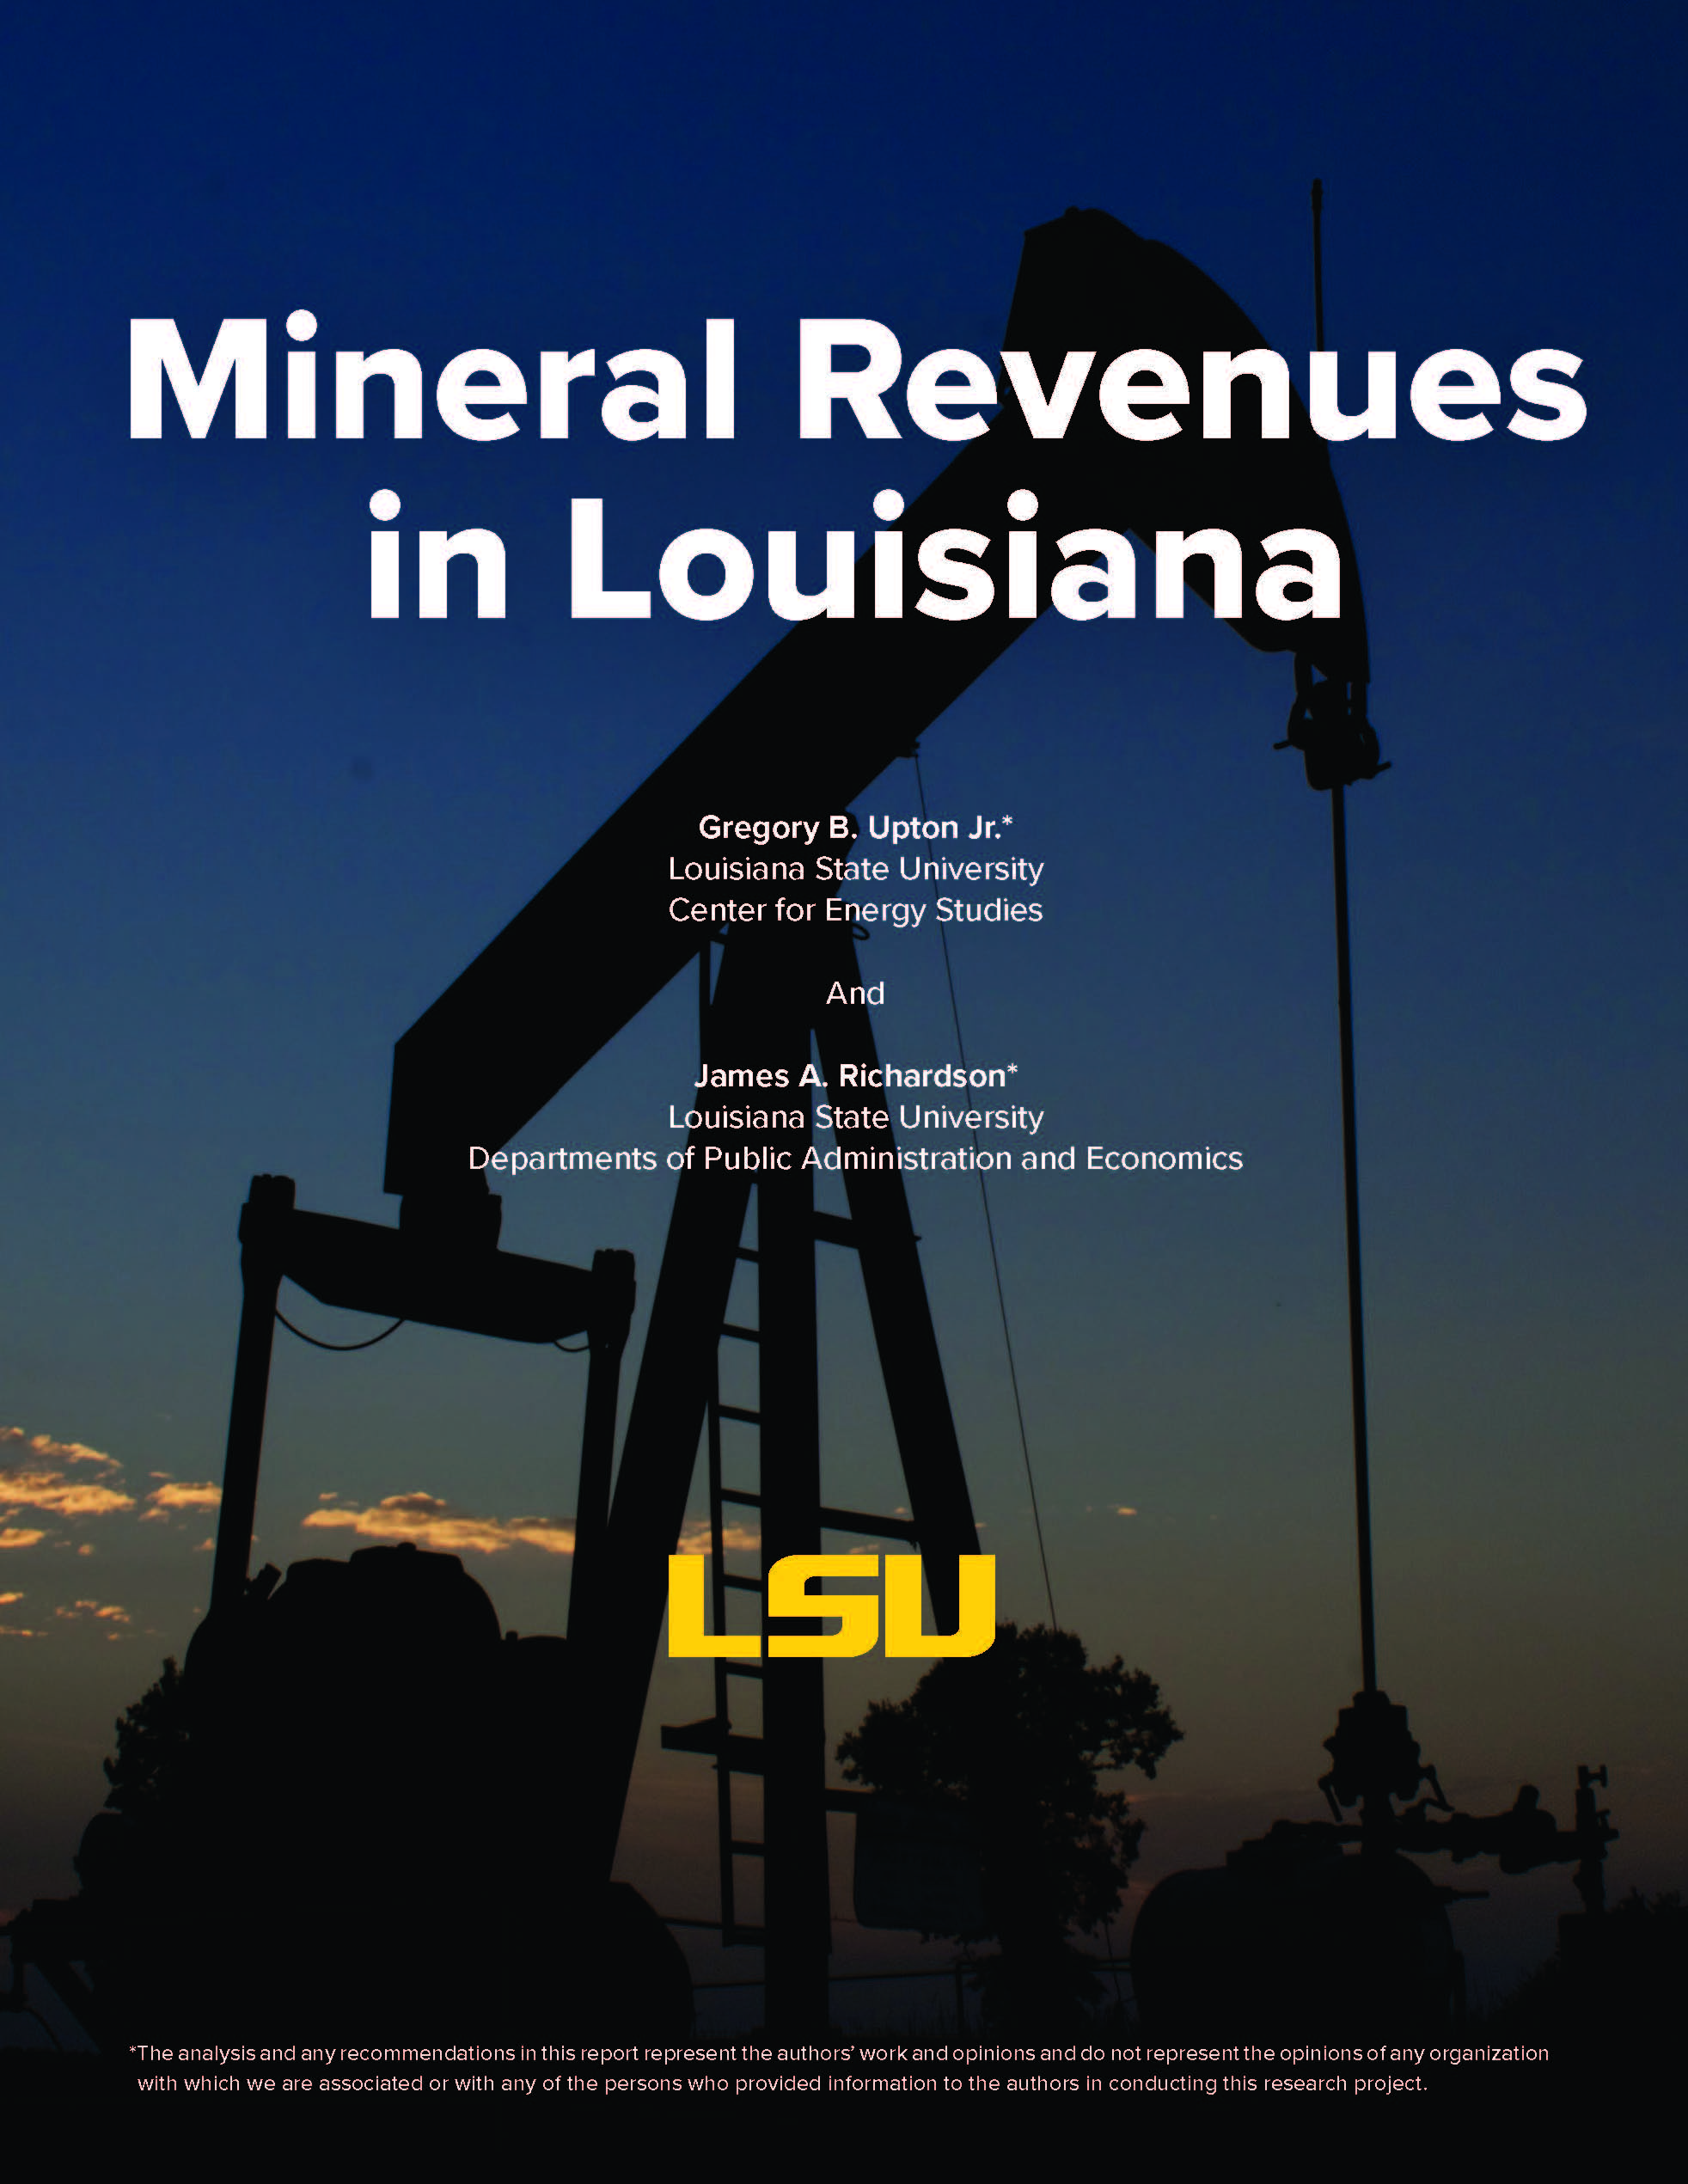 cover of mineral revenues report